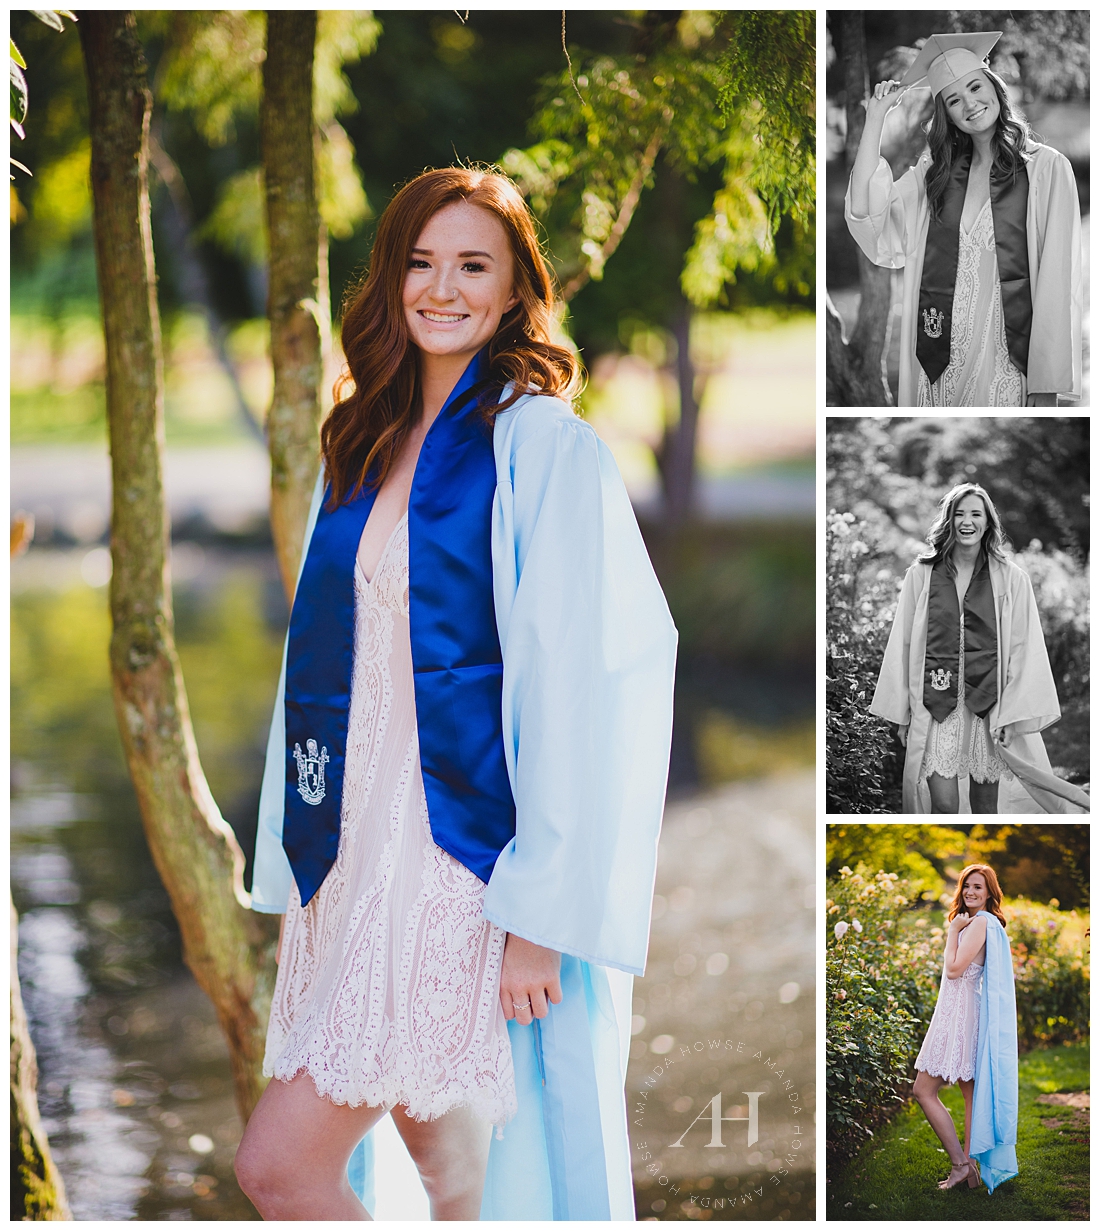 Senior Portraits with Cap and Gown | Photographed by Tacoma Senior Photographer Amanda Howse